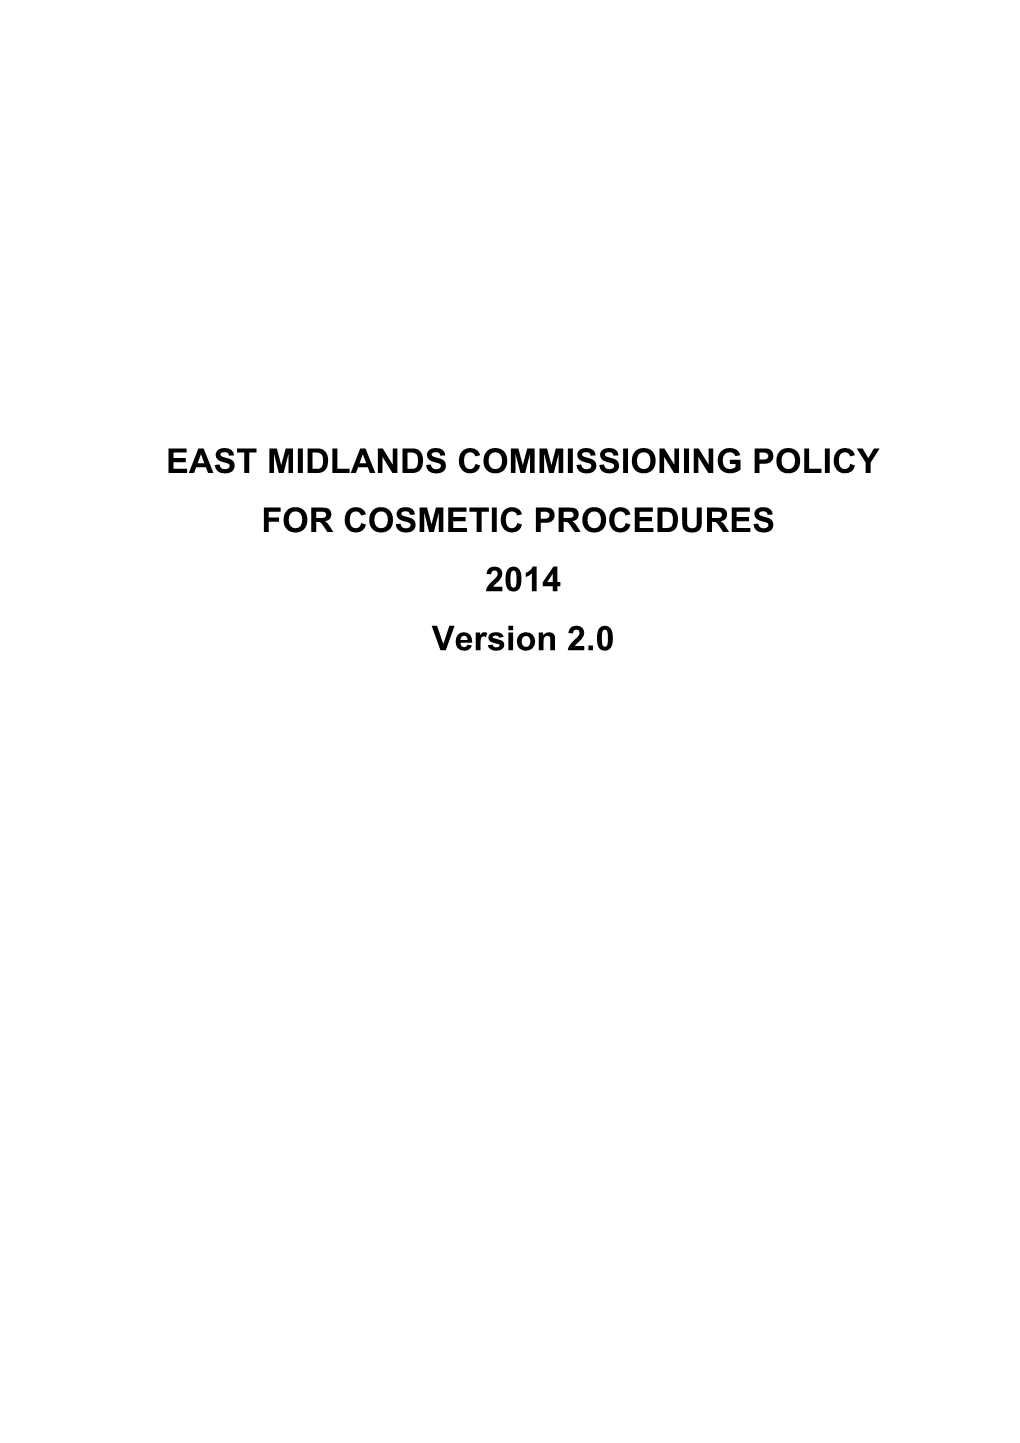 East Midlands Commissioning Policy